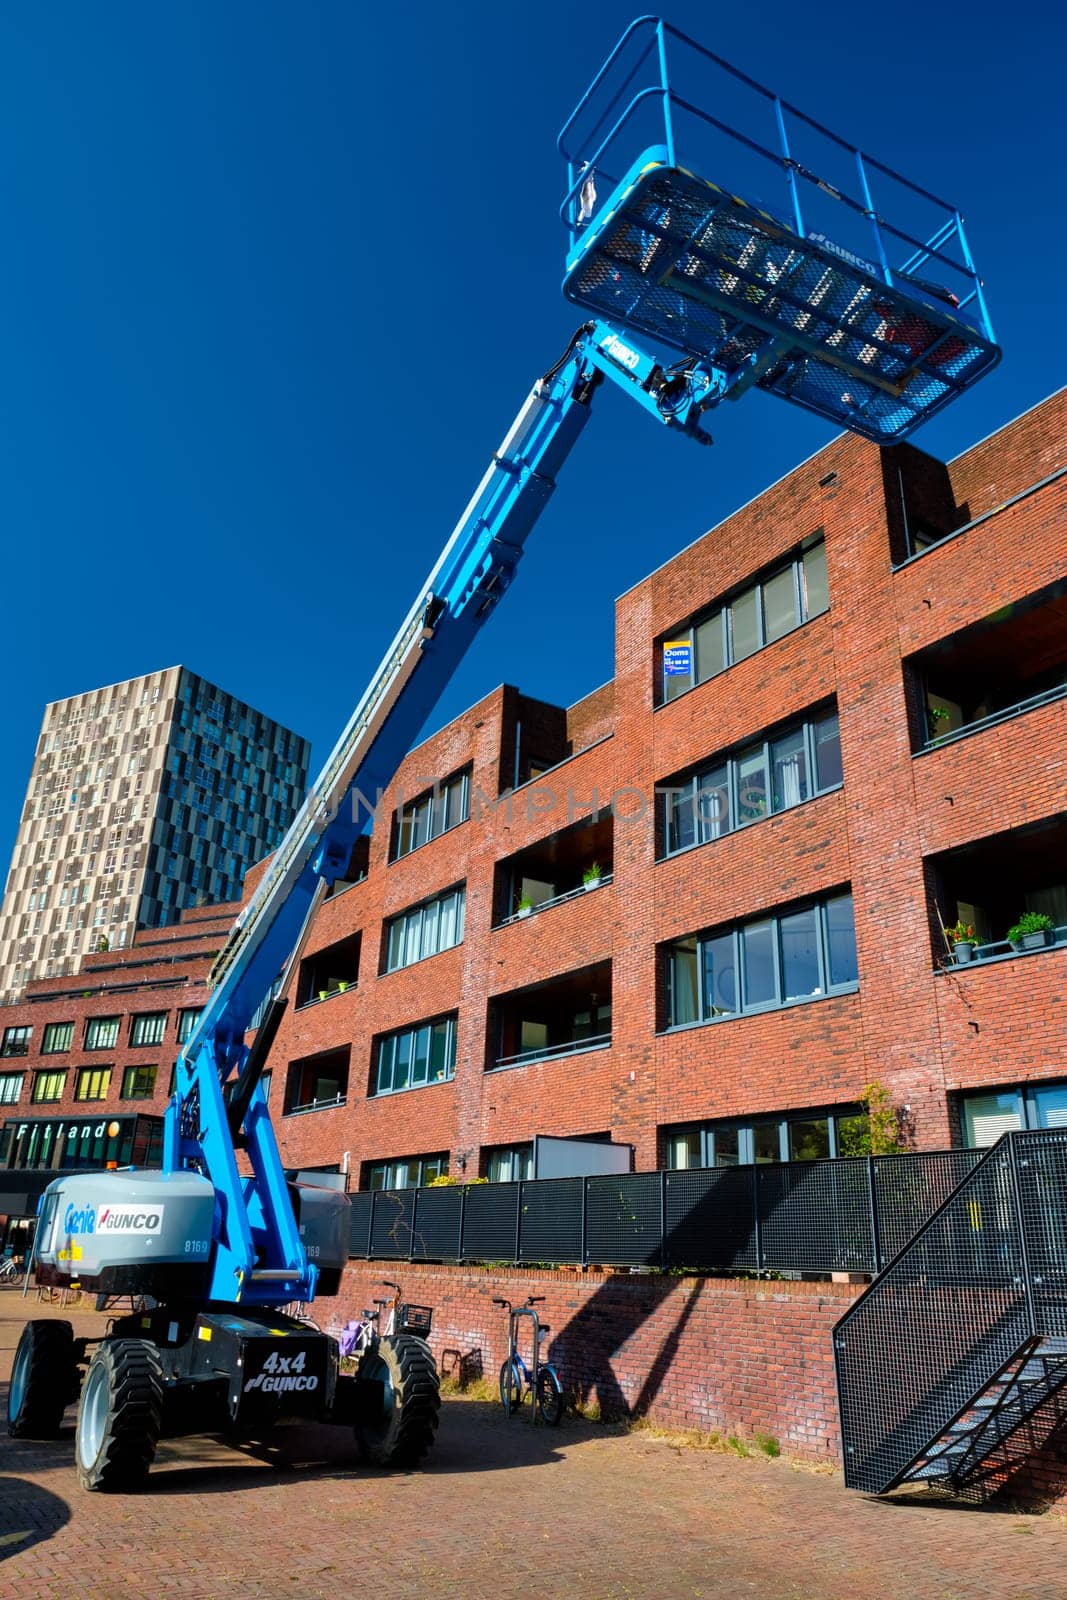 Telescopic boom lift by Gunco in the street of Rotterdam by dimol